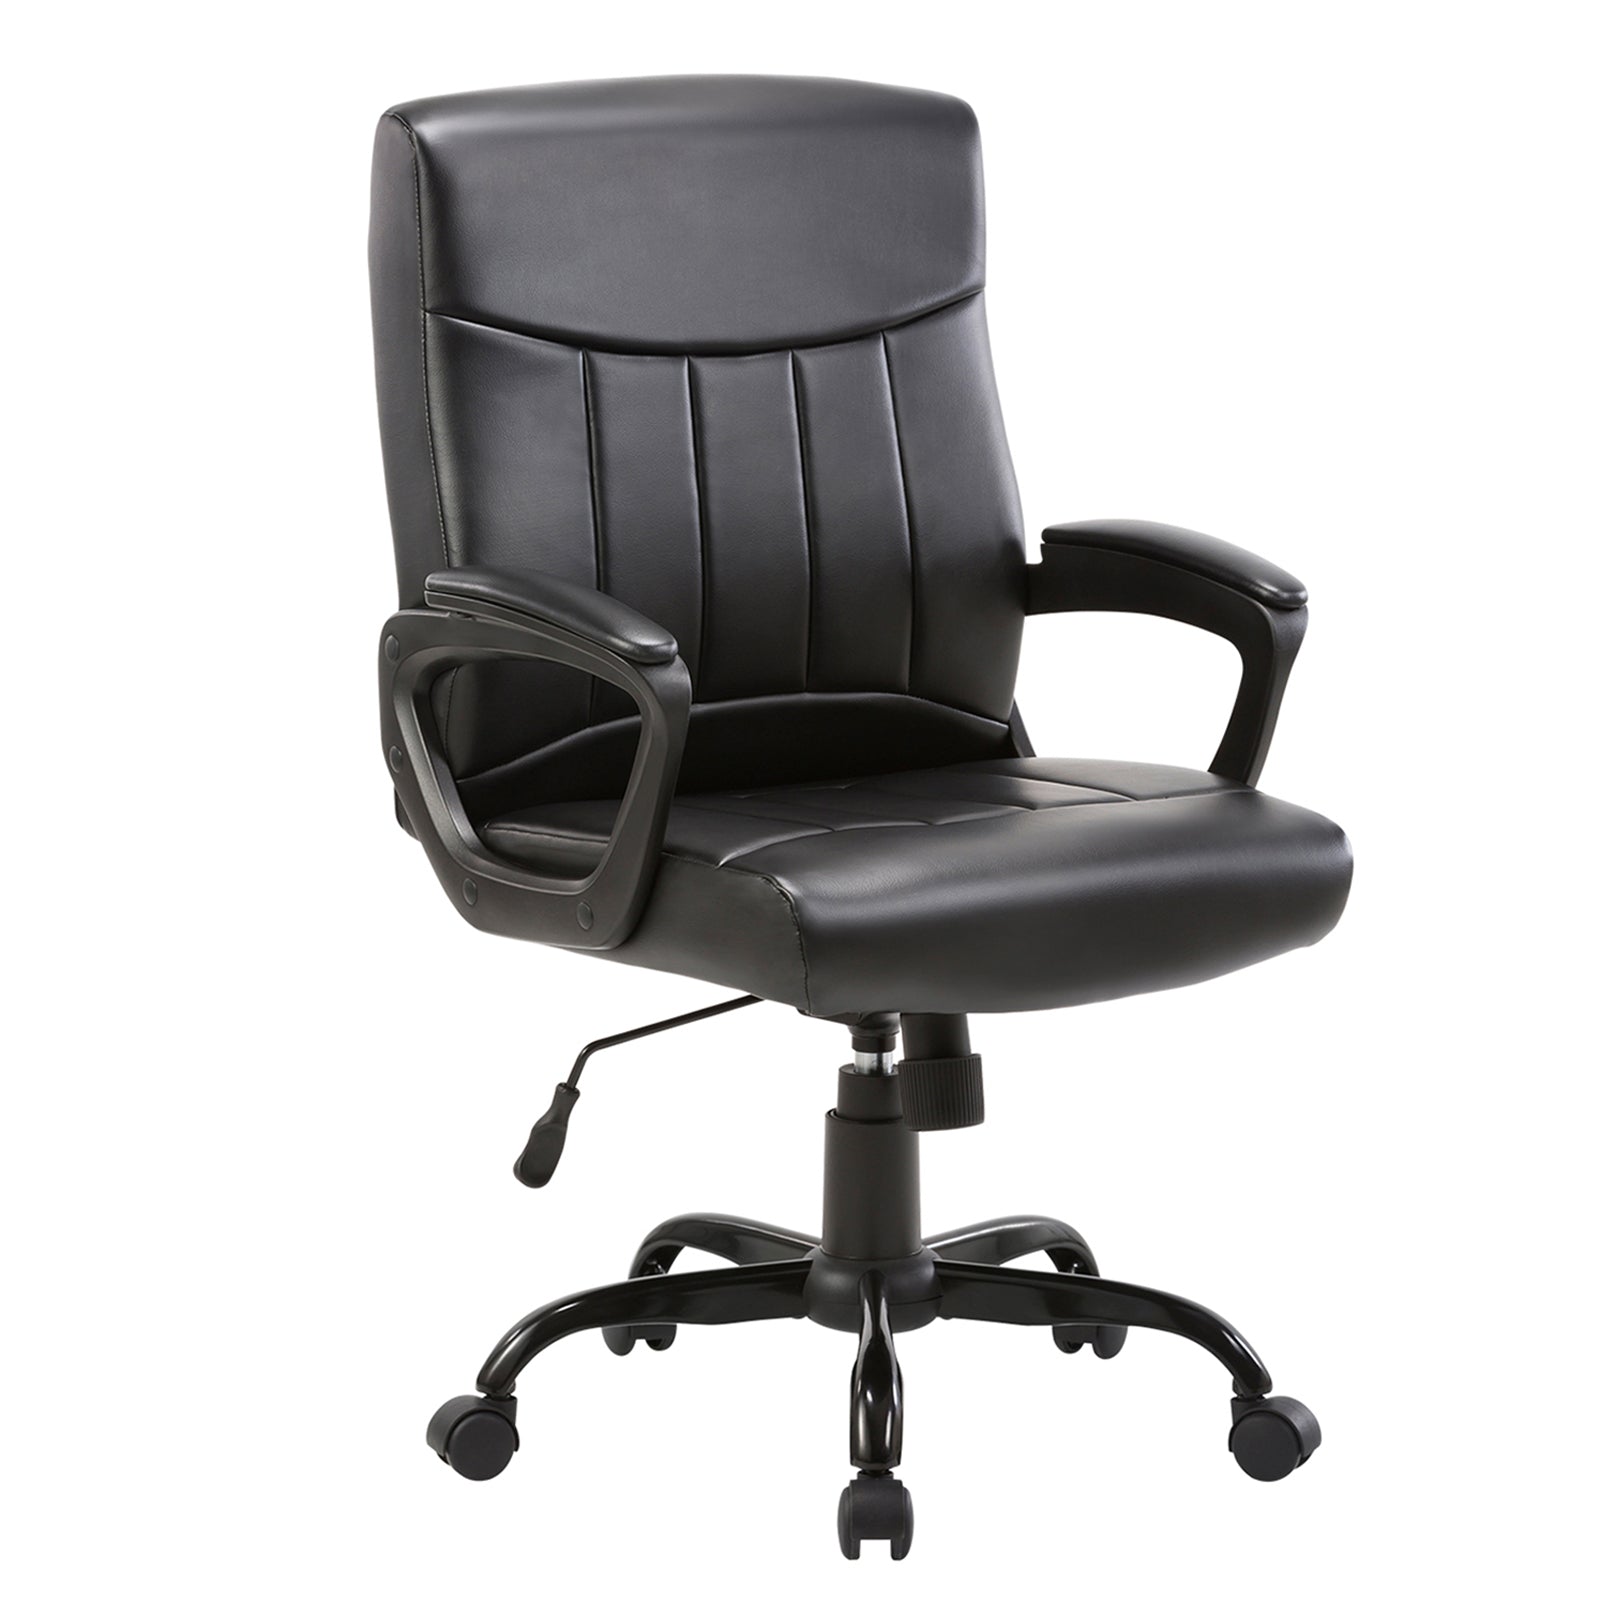 CLATINA Mid Back Leather Office Executive Chair with Lumbar